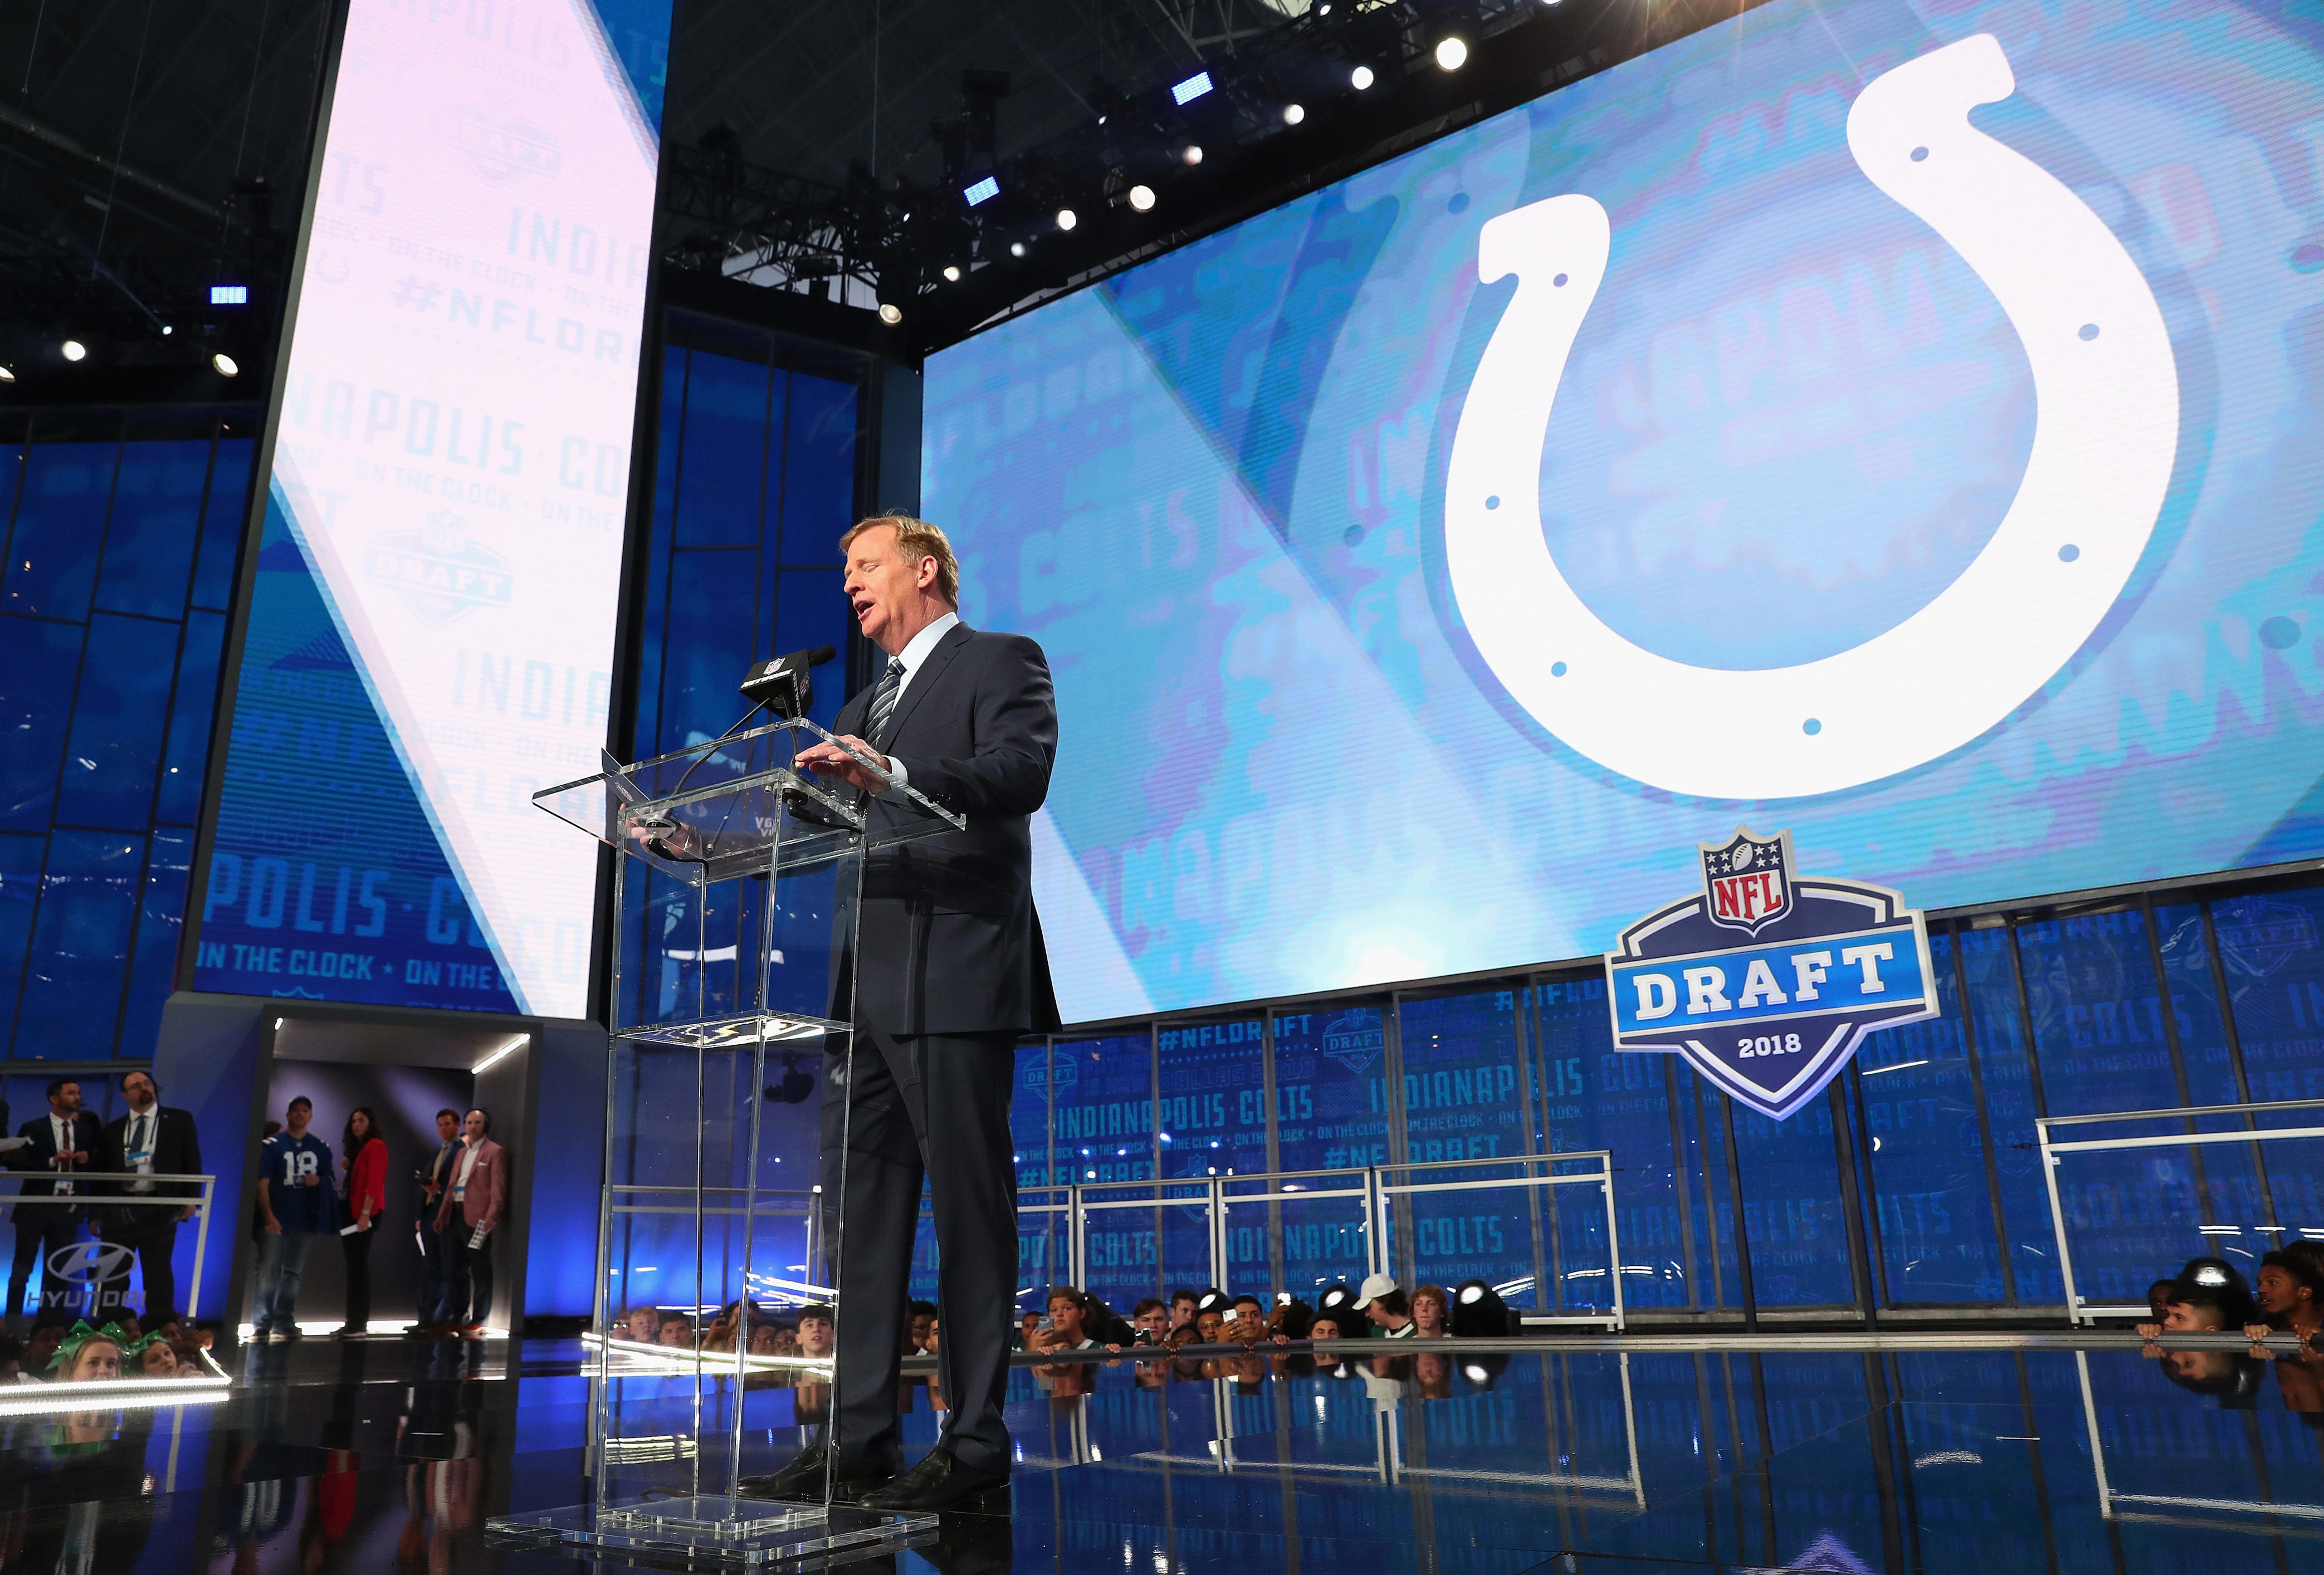 espn proposes trade down scenario for colts in first round of nfl draft